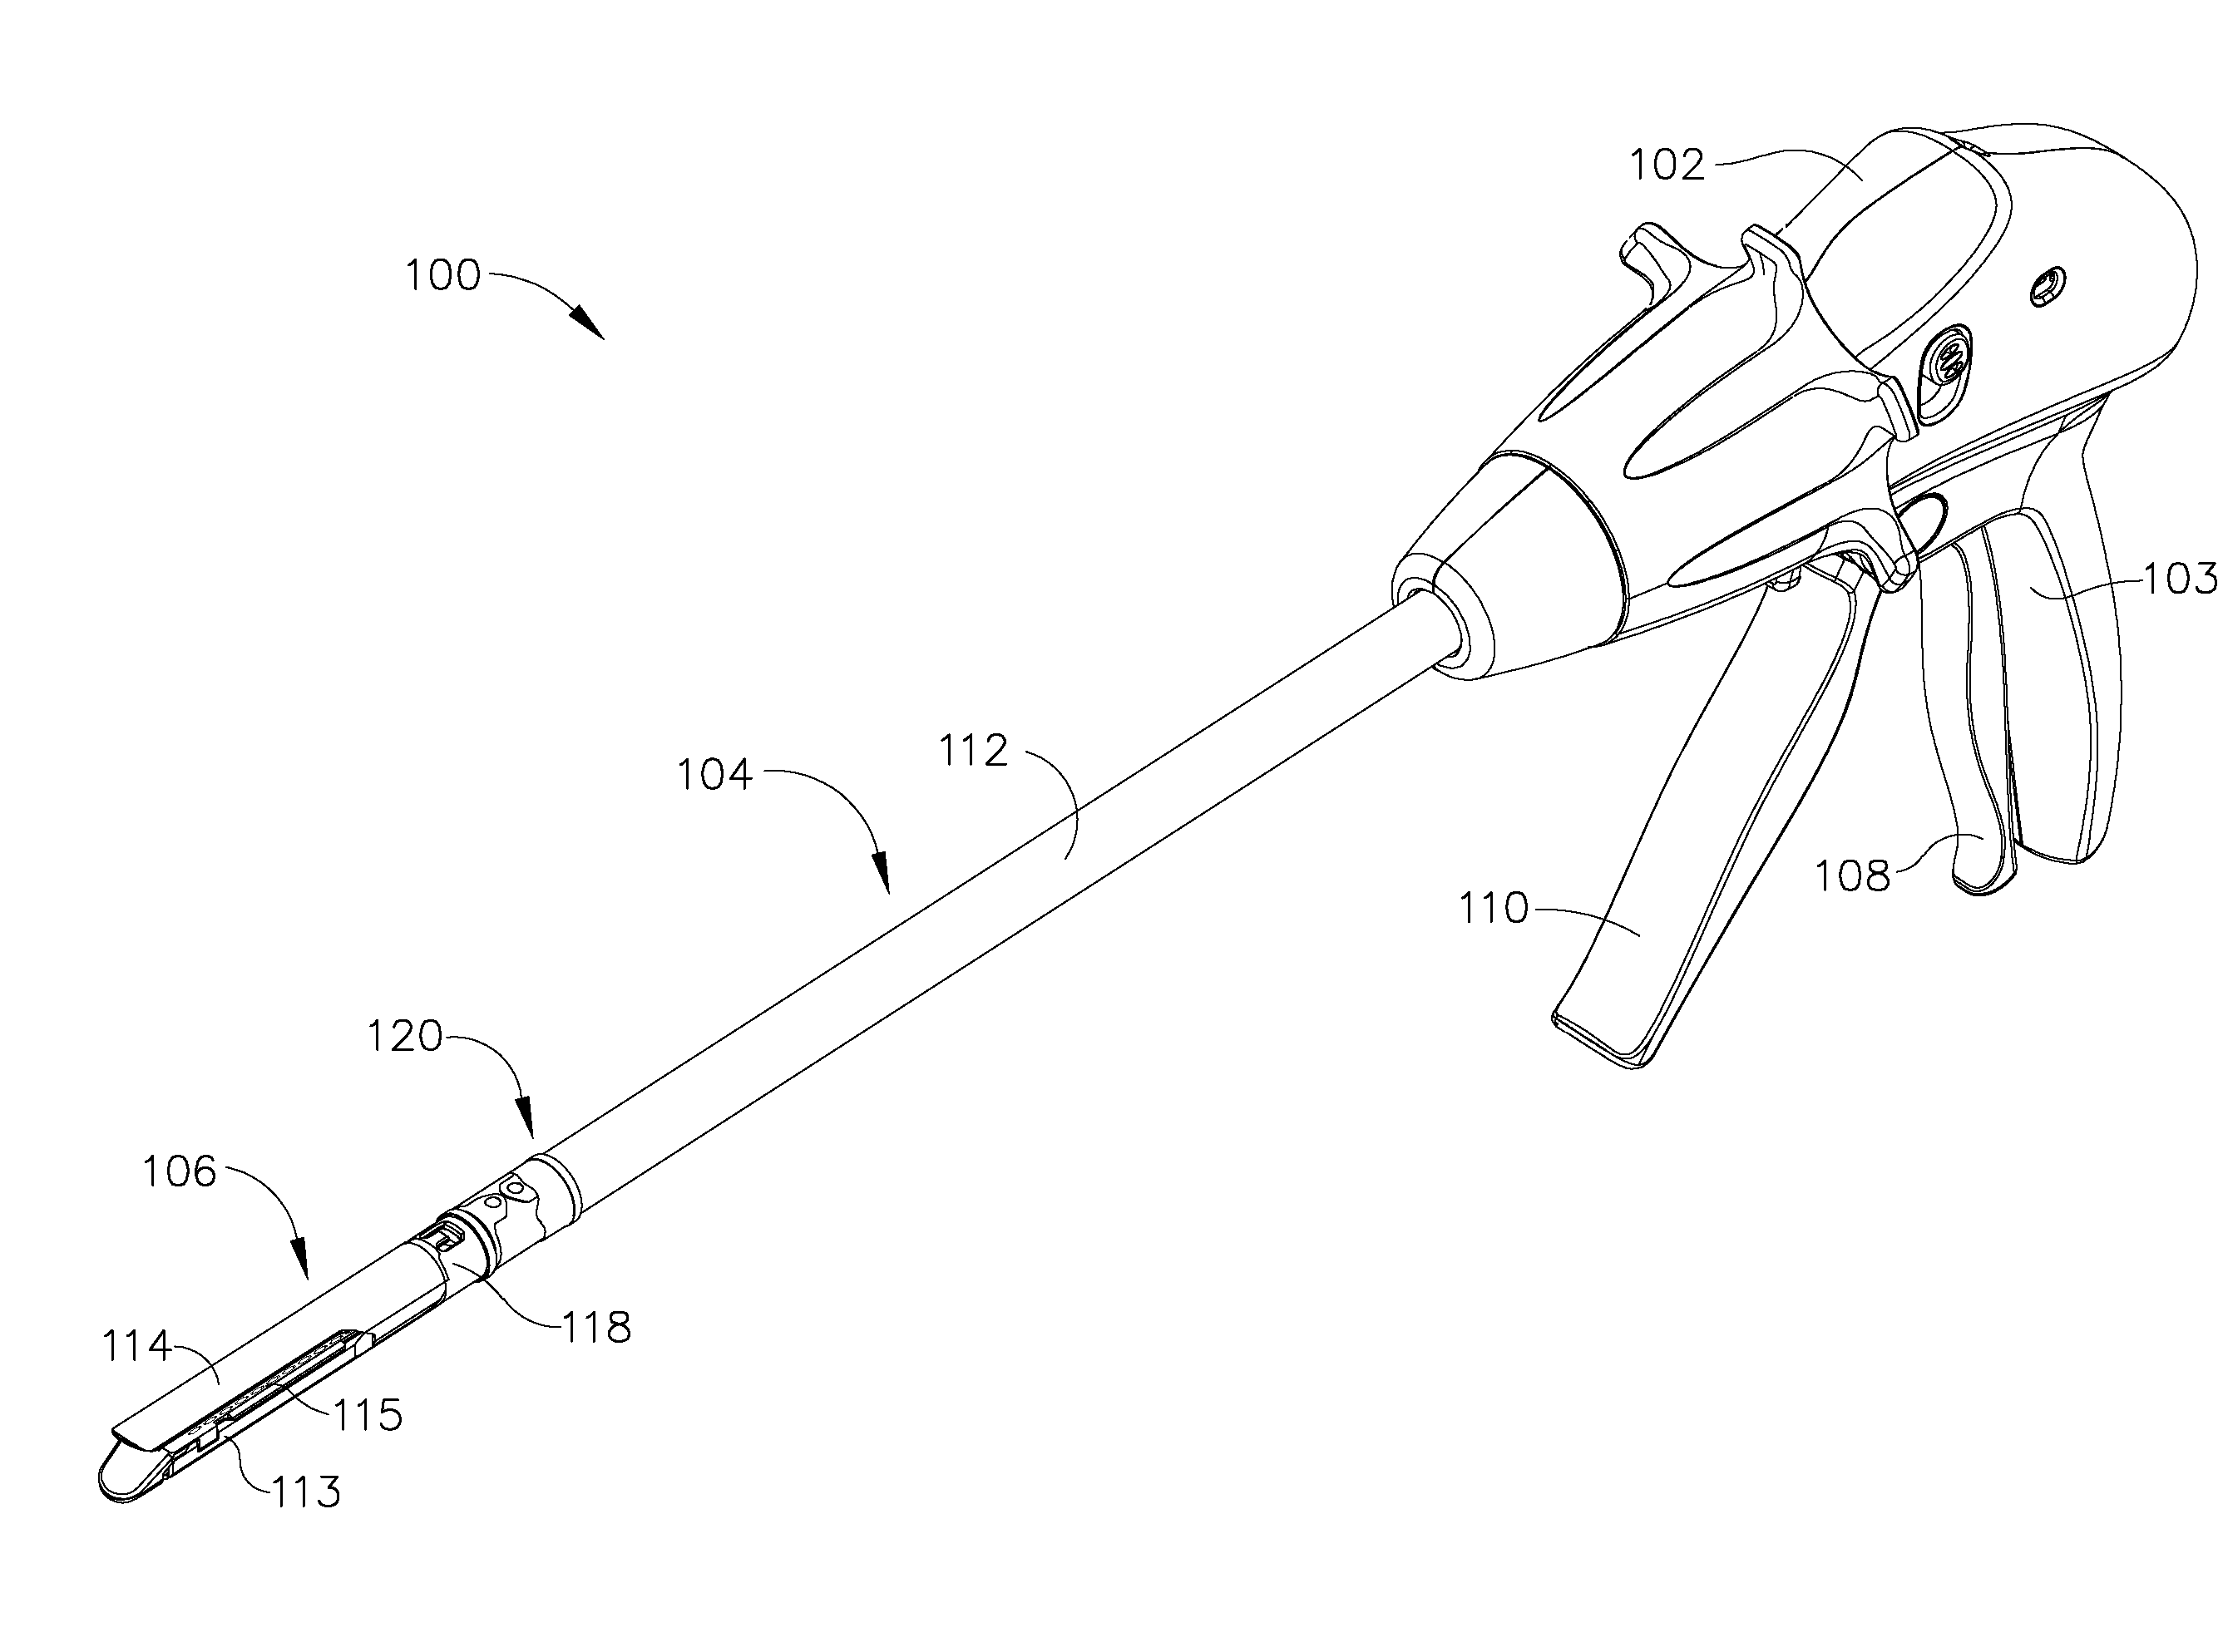 Surgical stapling instrument